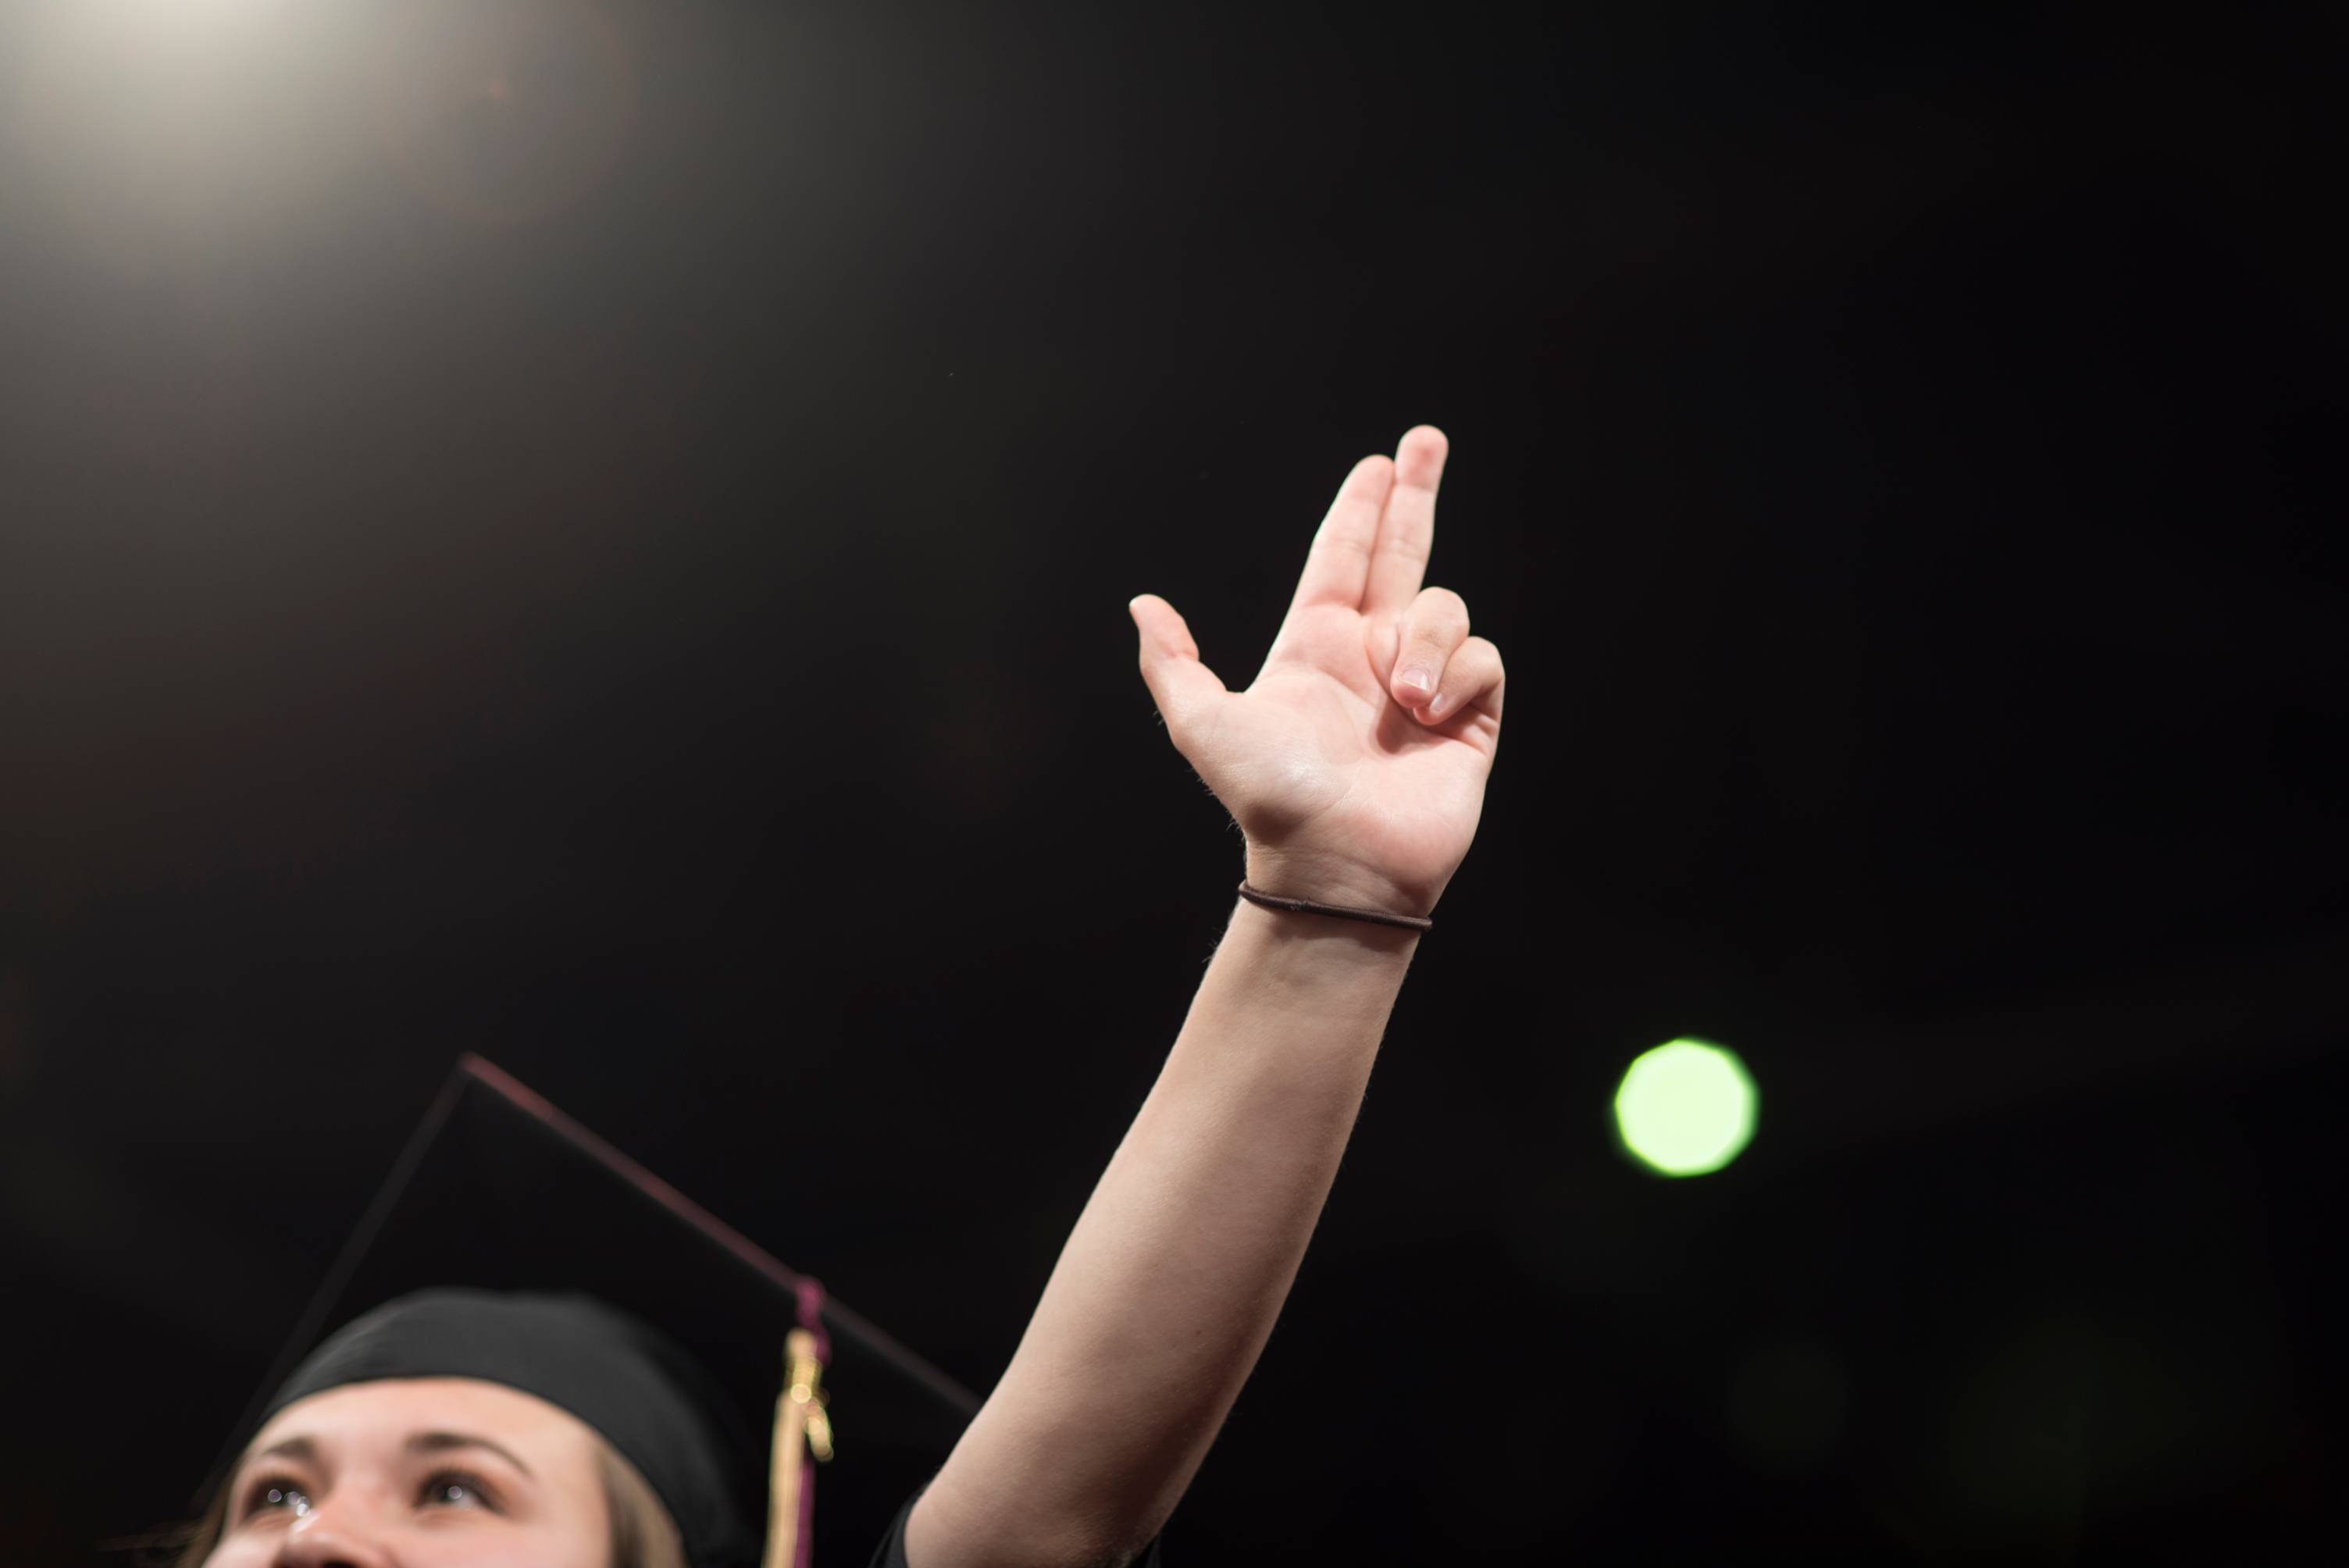 Picture of dark background with a student's hand in the air forming the shape of Texas